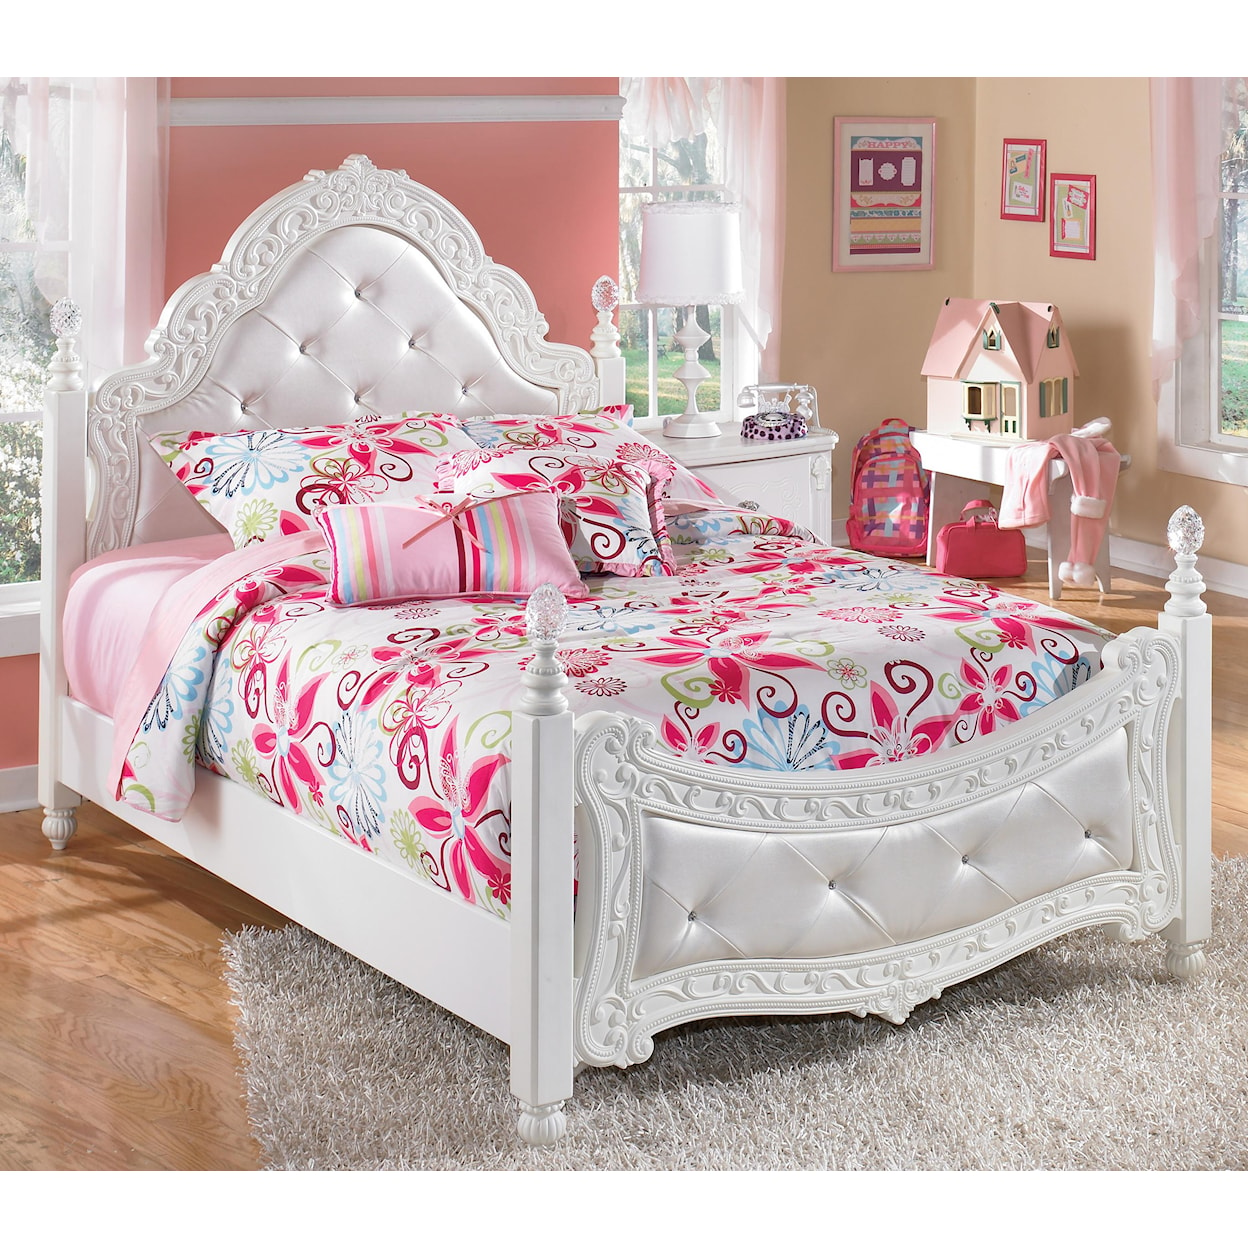 Signature Design by Ashley Exquisite Full Poster Bed